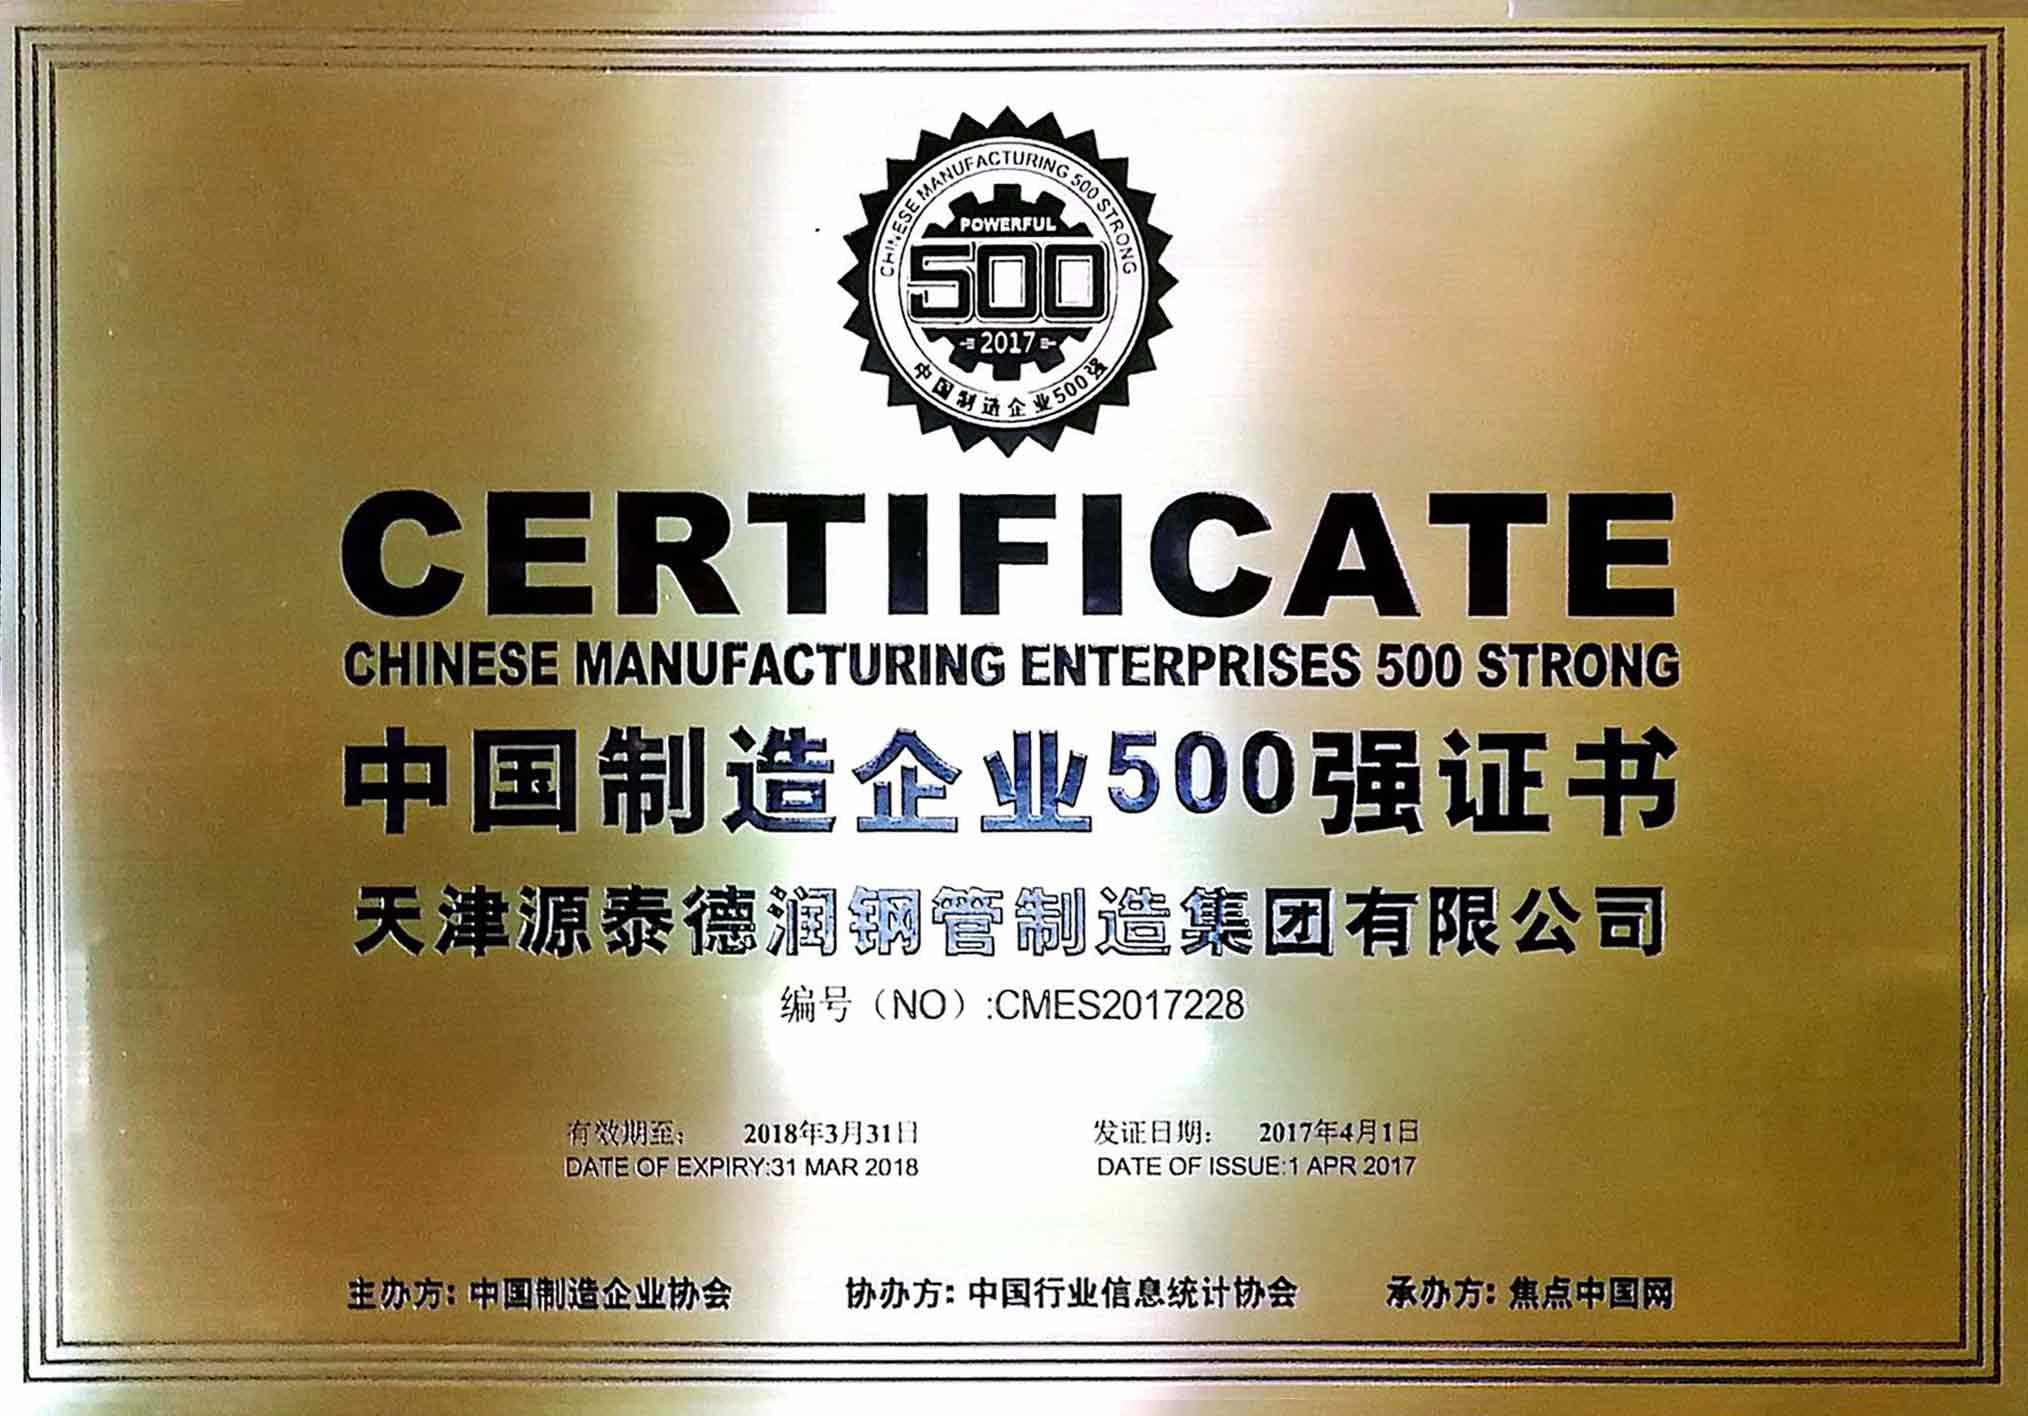 OMG！Square and Rectangular HWS enterprise enters into CHINA TOP 500 PRIVATE ENTERPRISE !